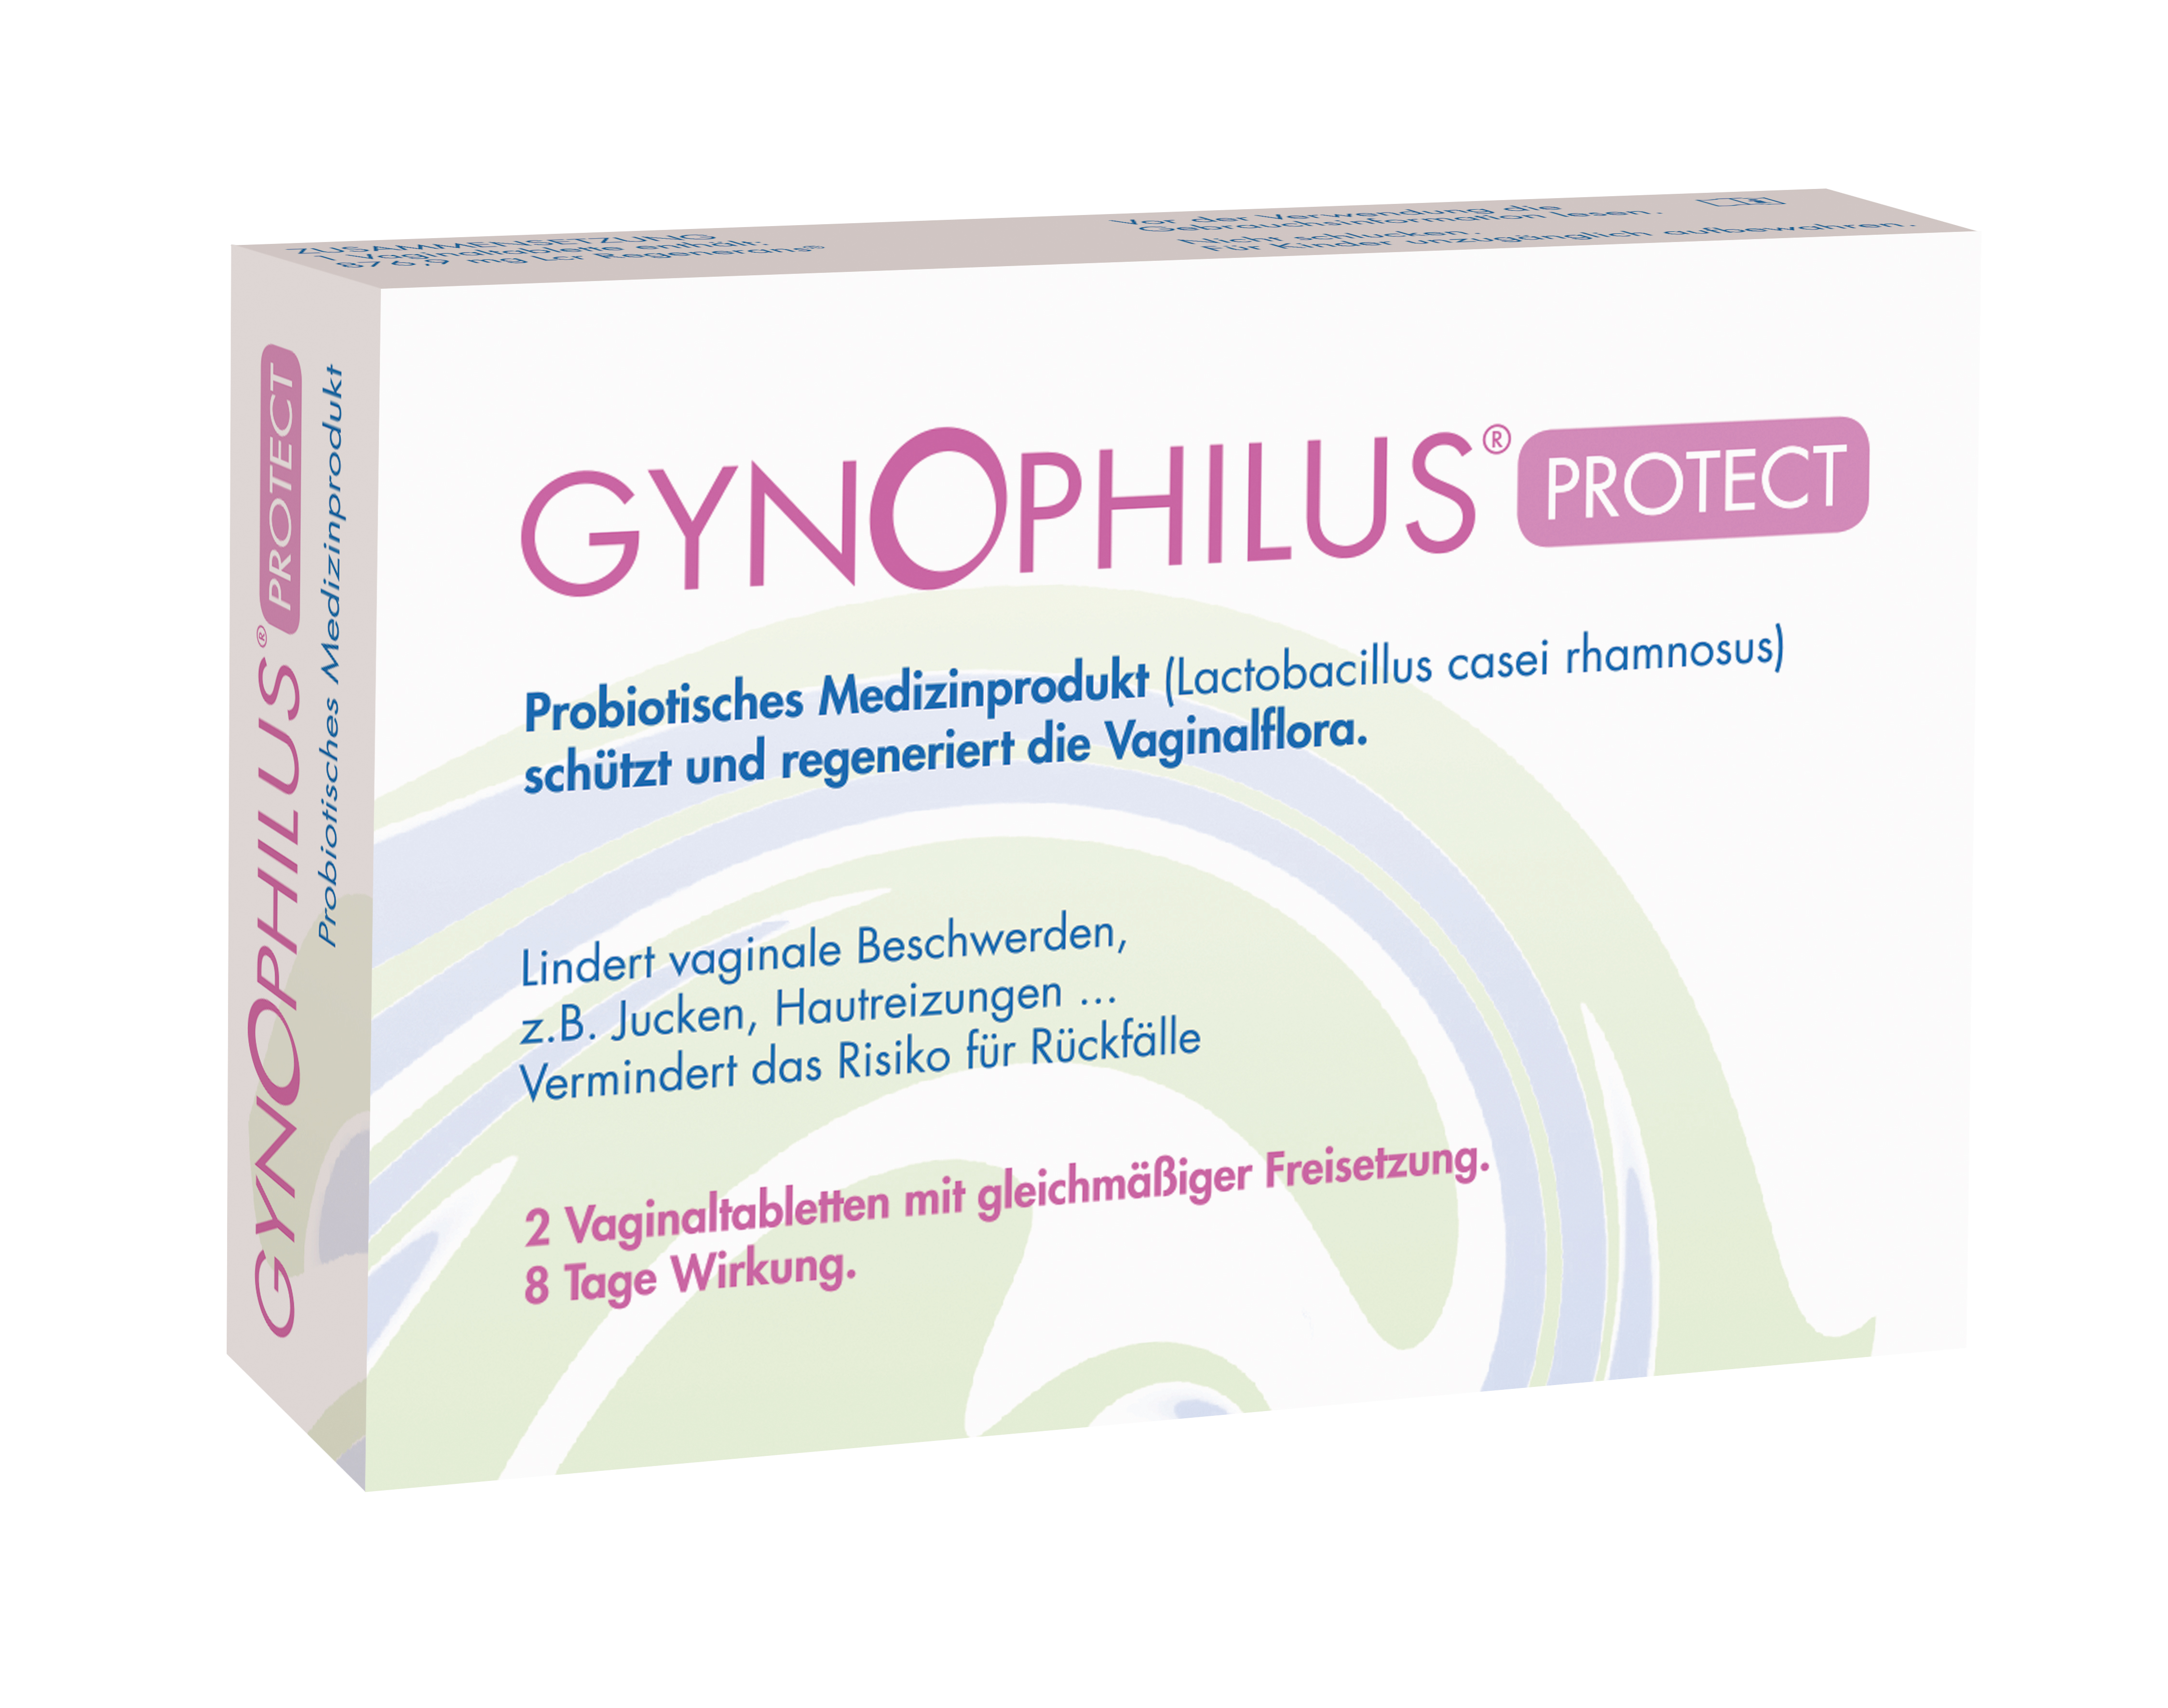 Gynophilus protect